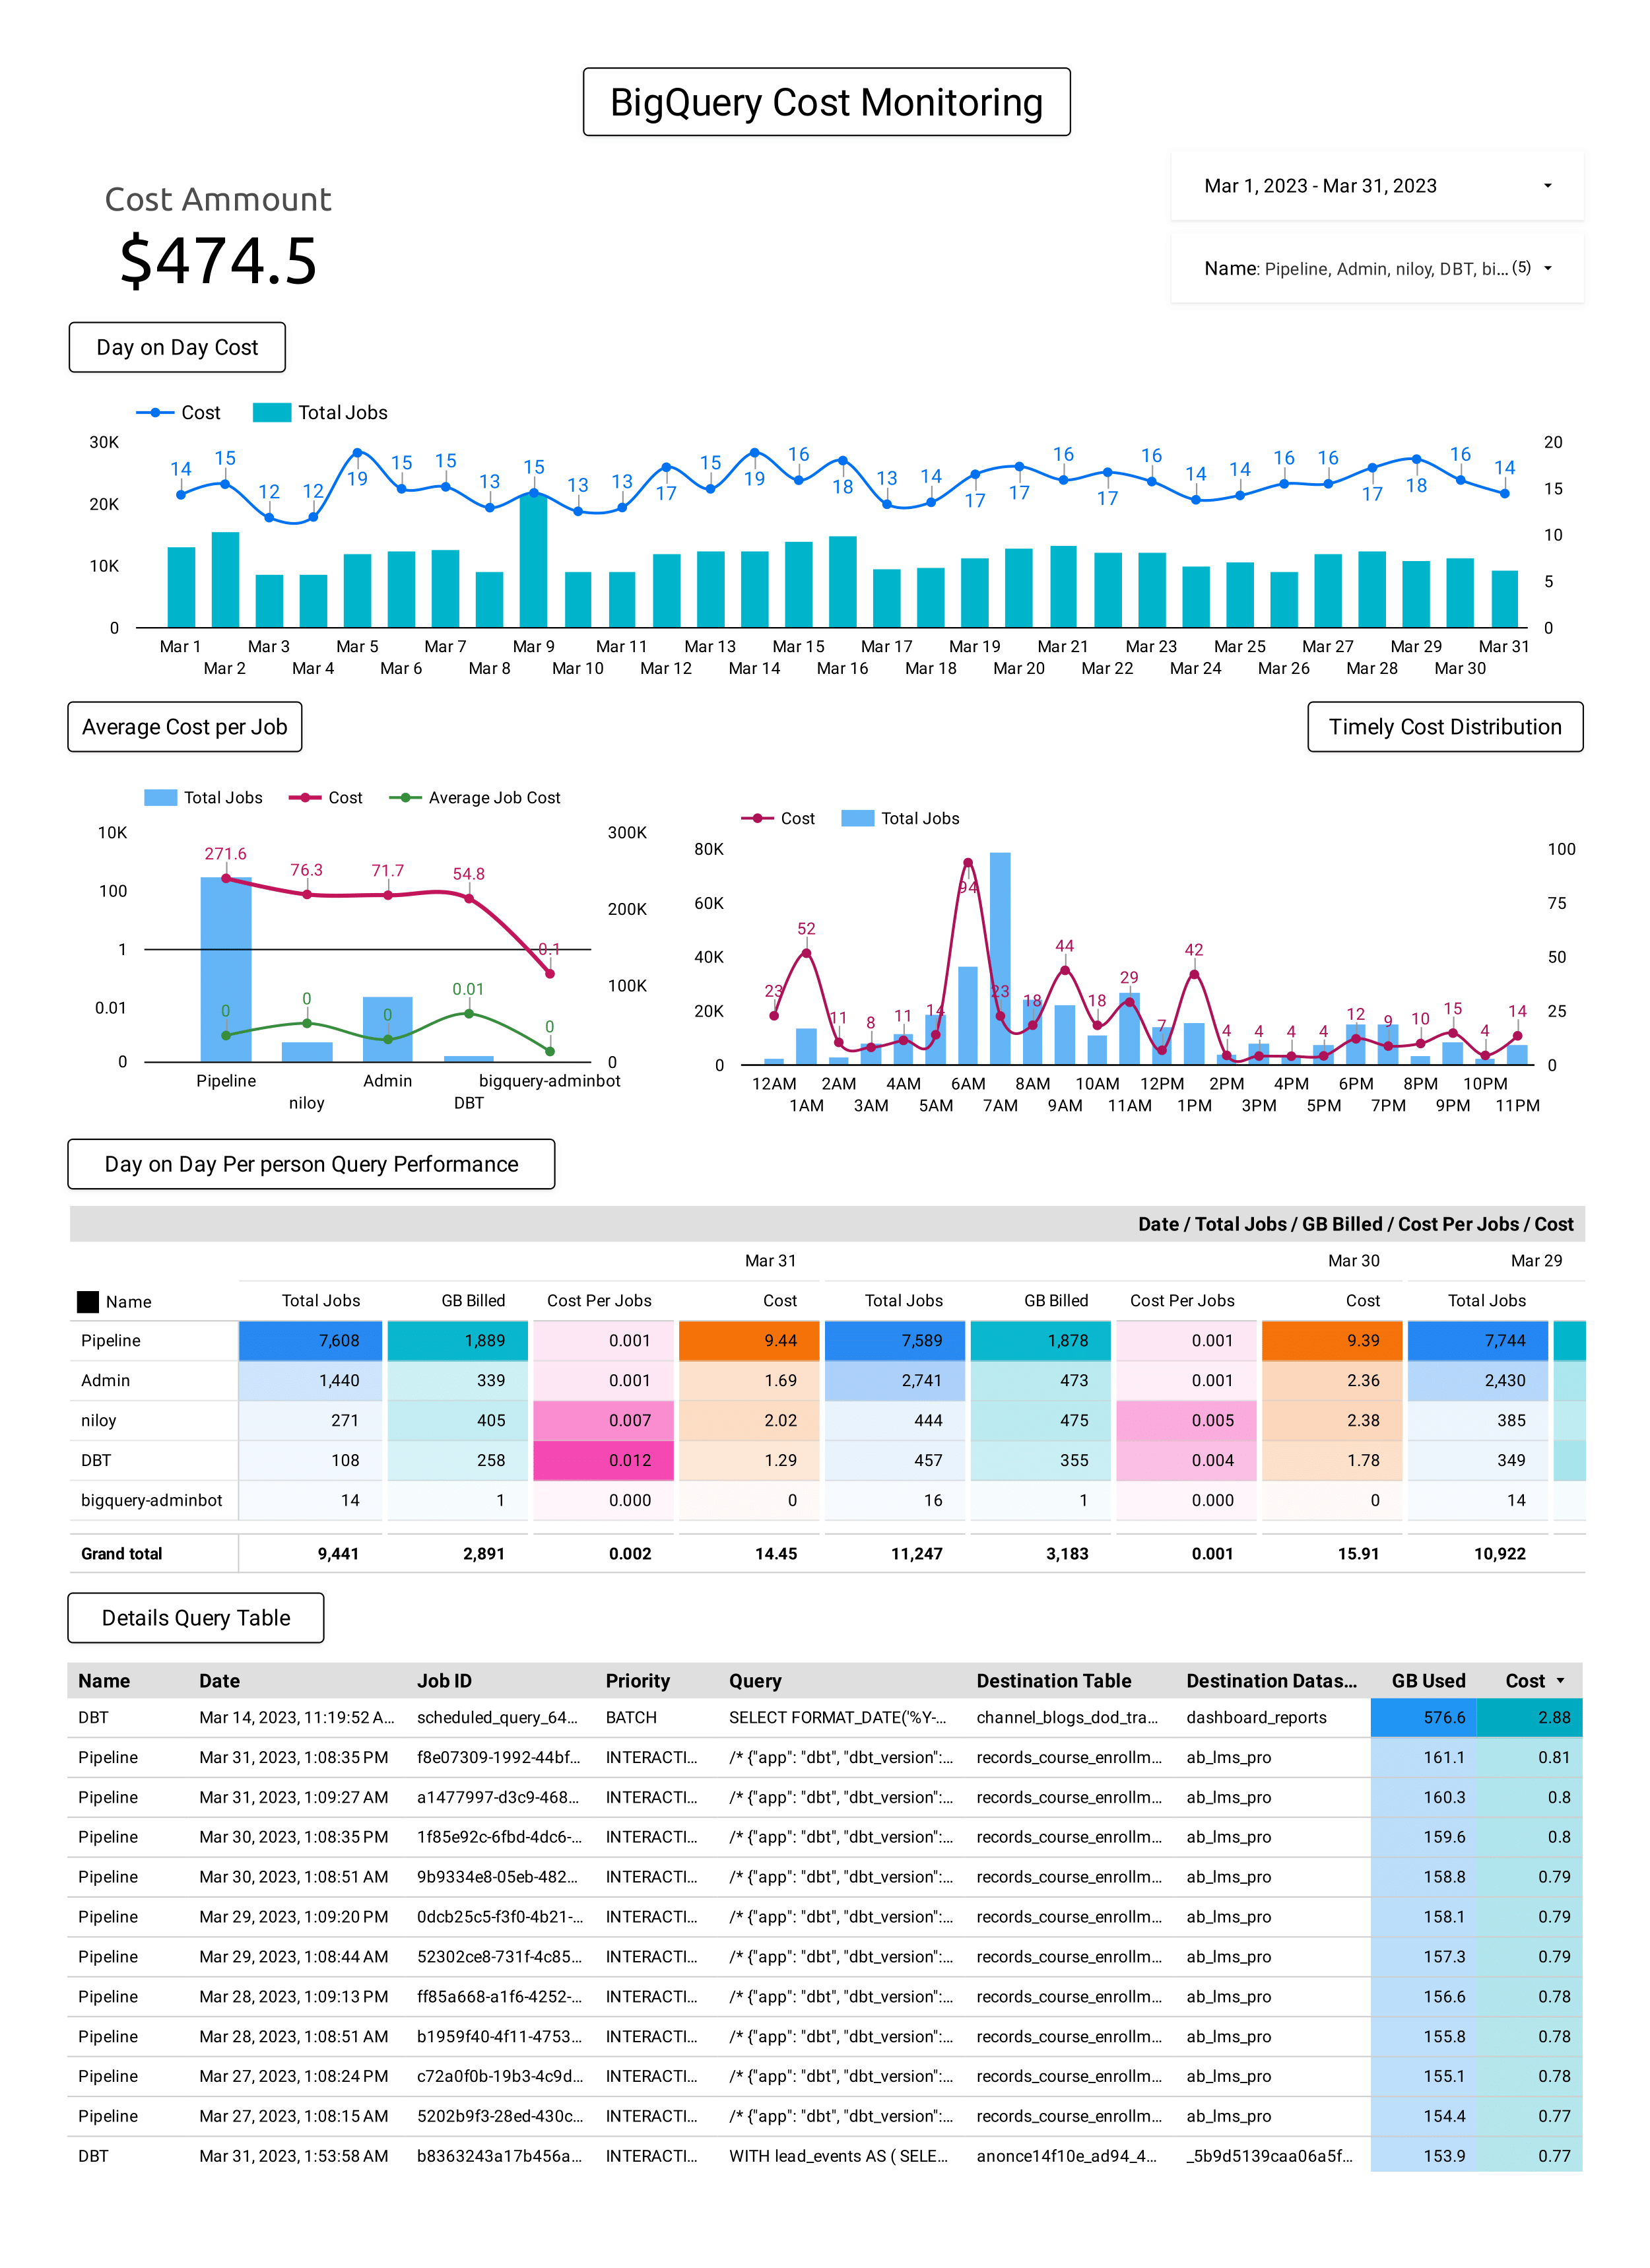 Data Analyst - BigQuery project image